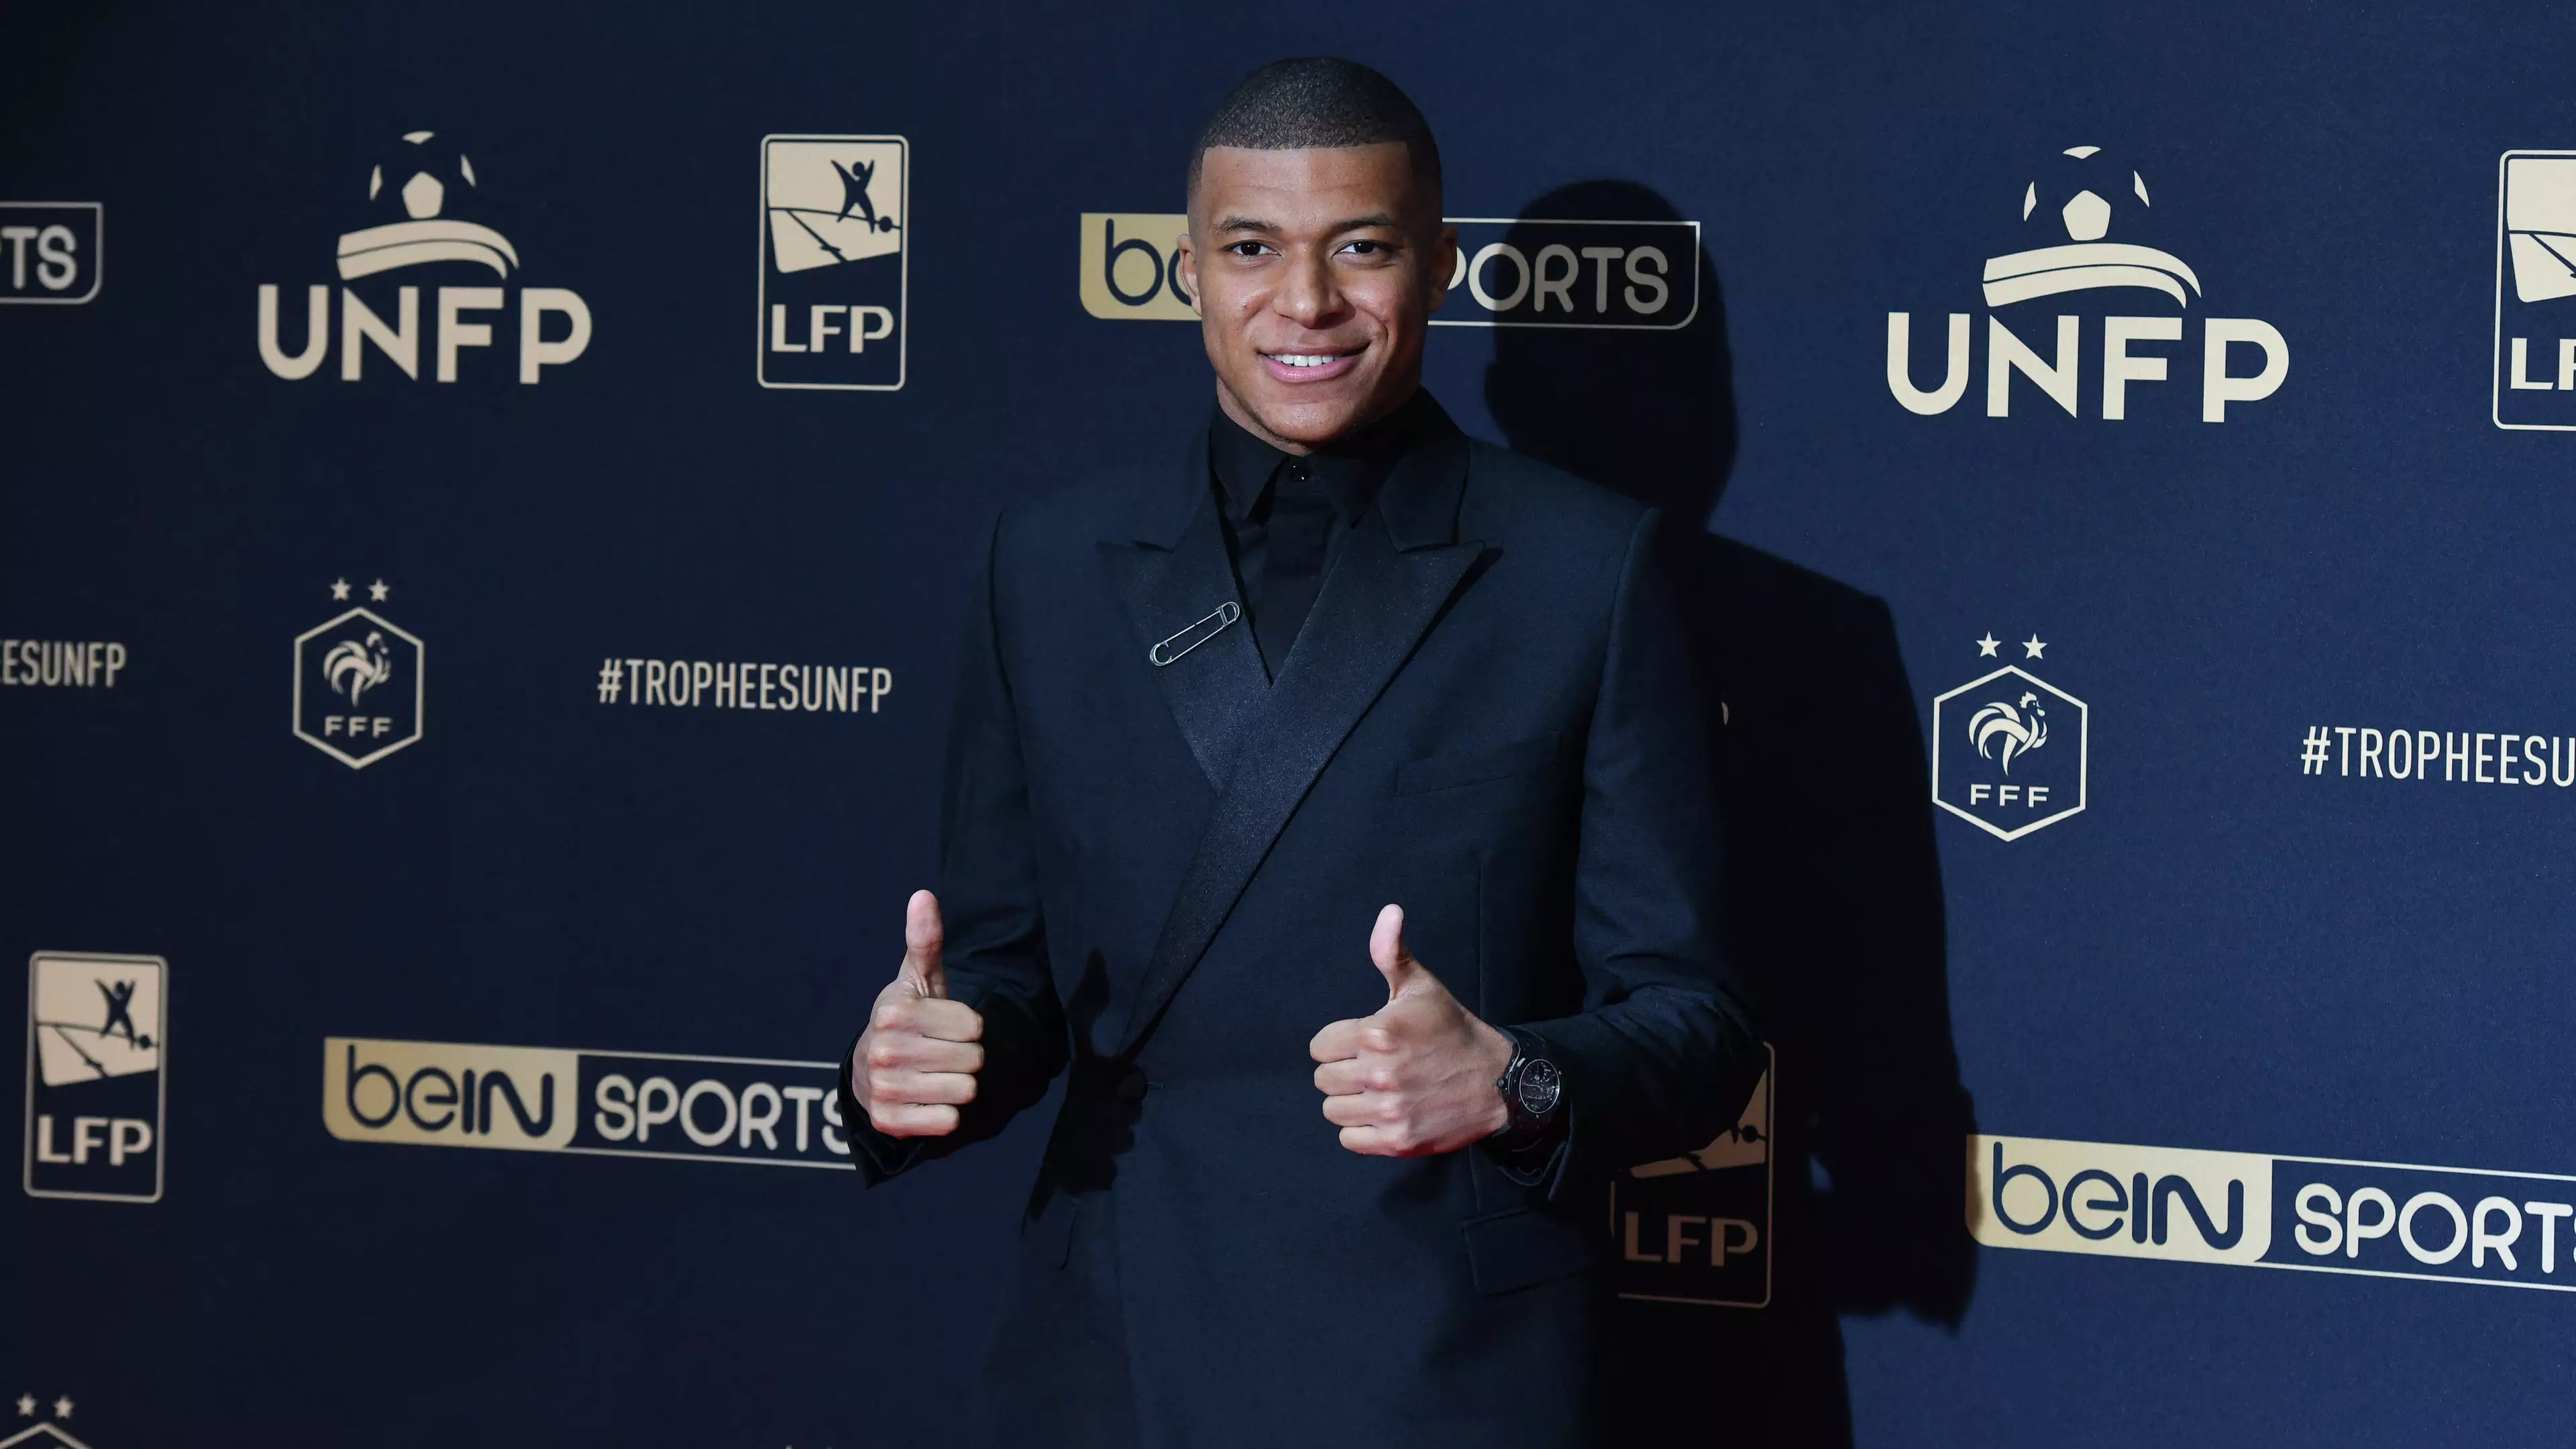 Kylian Mbappe Is The Most Valuable Player In Europe's Top Five Leagues